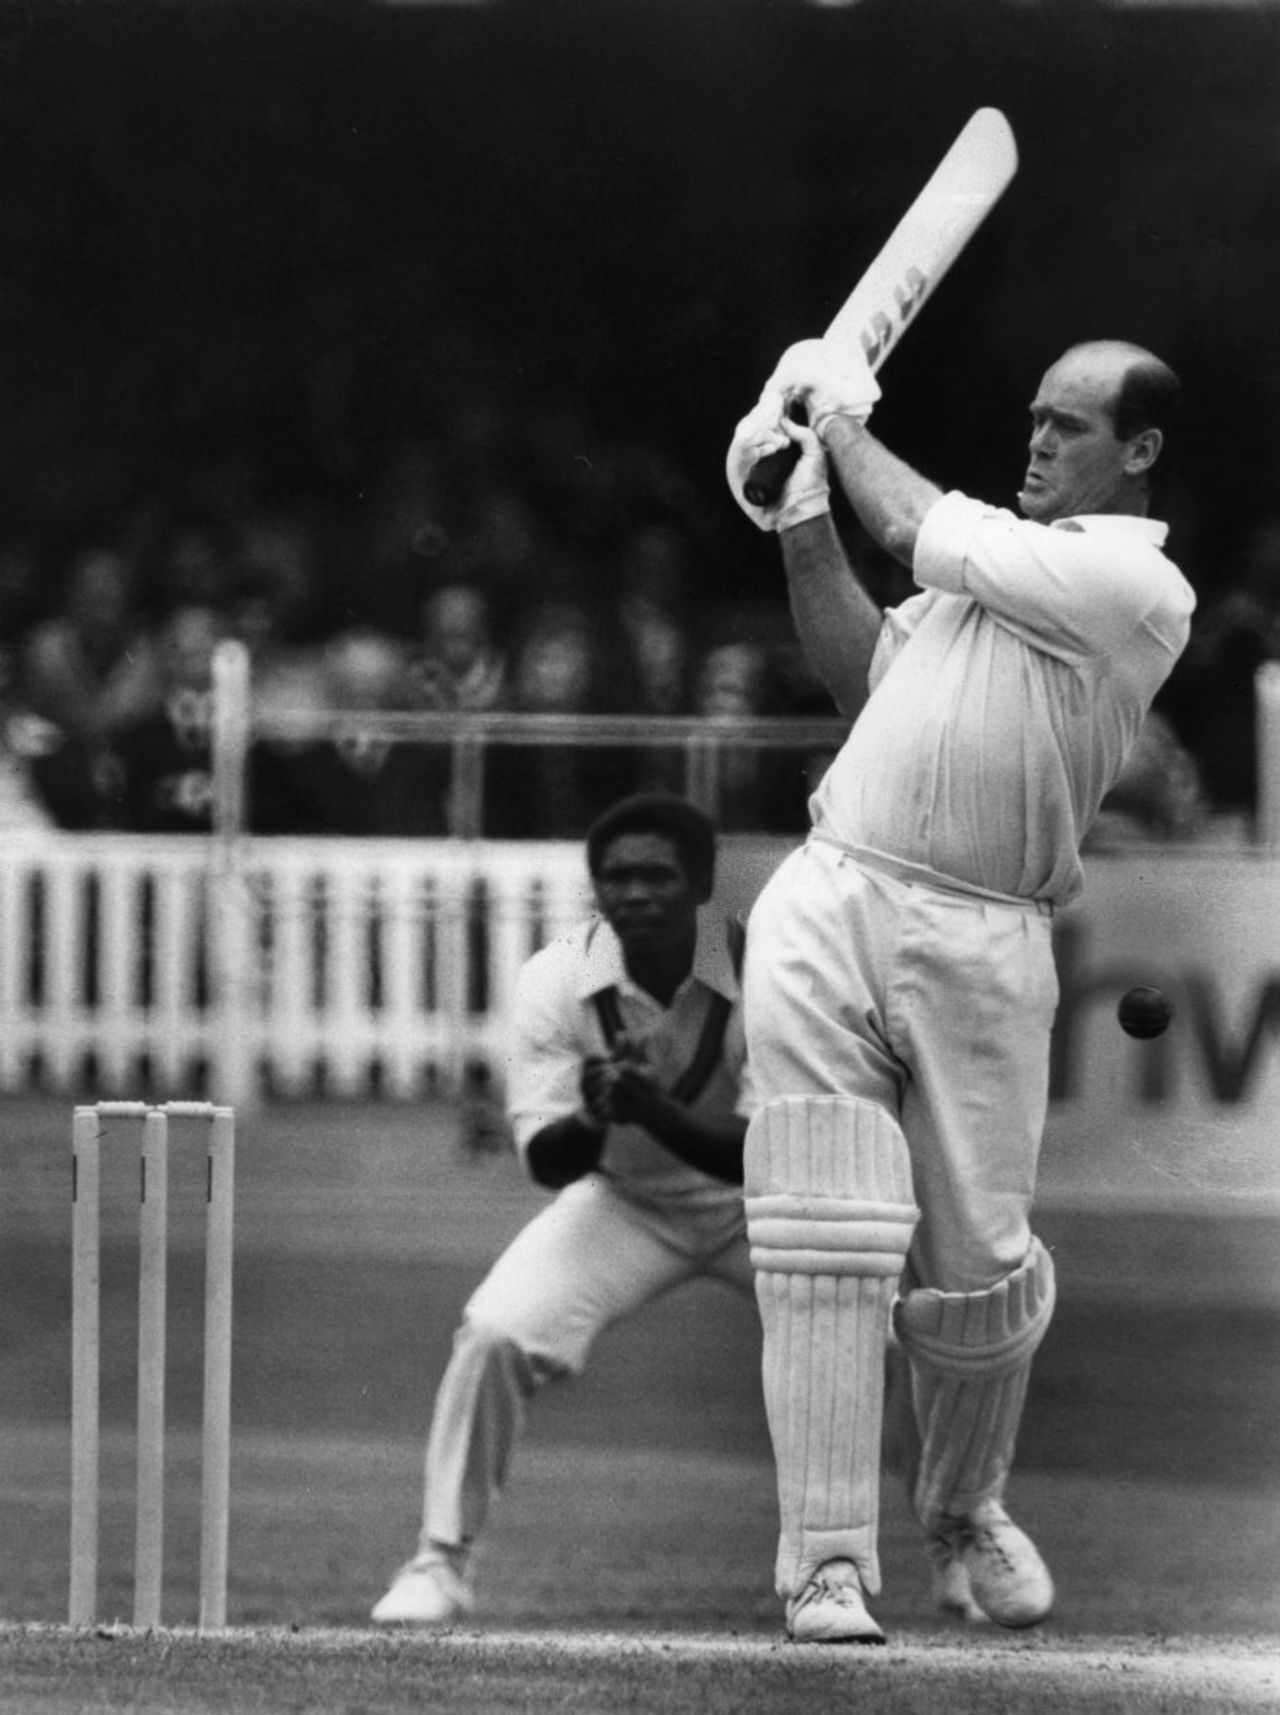 Yorkshire and England cricketer Brian Close in action, June 22, 1976